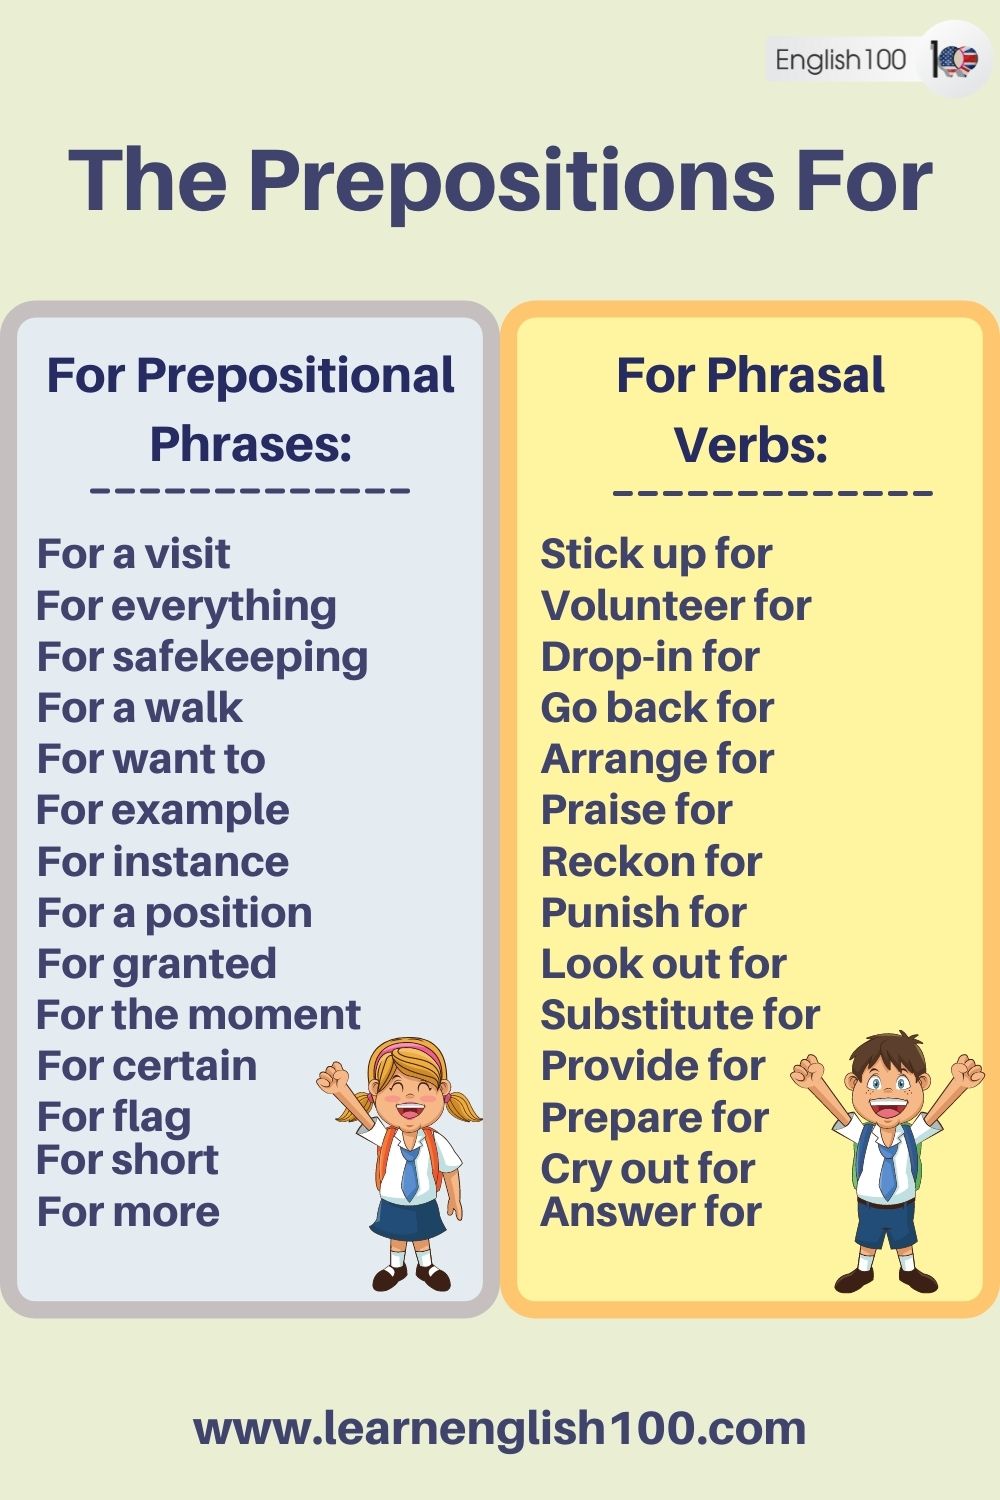 The Preposition For